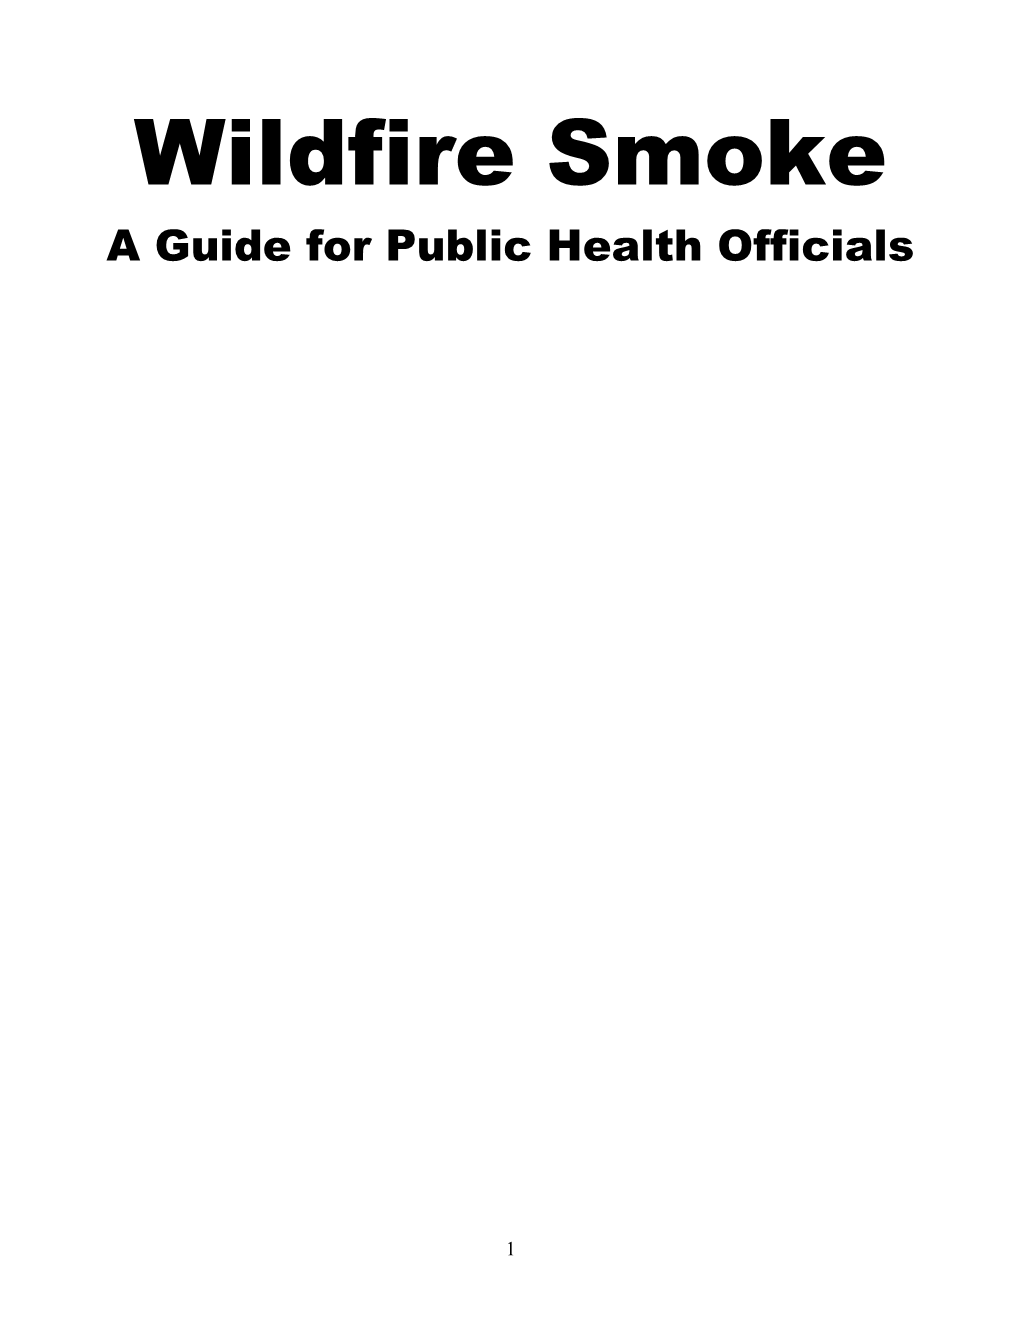 A Guide for Public Health Officials